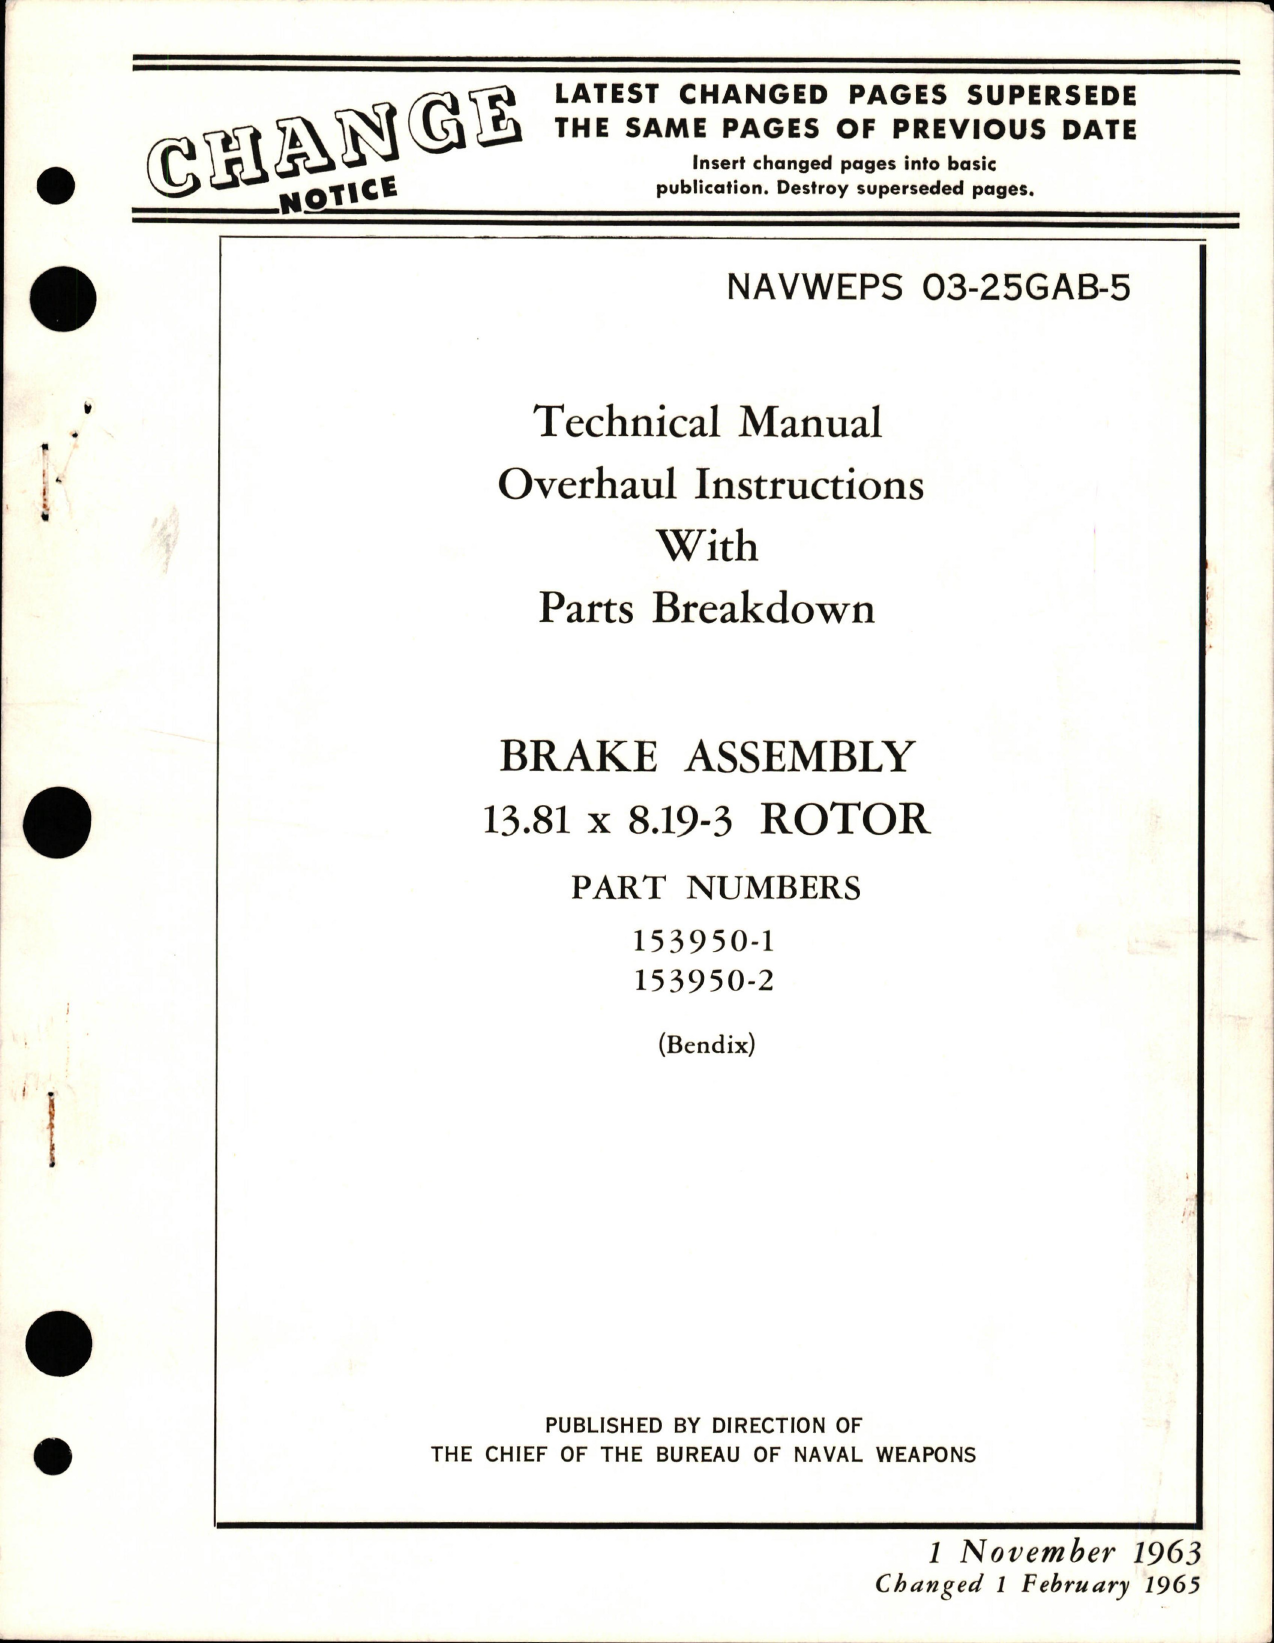 Sample page 1 from AirCorps Library document: Overhaul Instructions with Parts Breakdown for Brake Assembly - 13.81x8.19-3 Rotor - Part 153950-1 and 153950-2